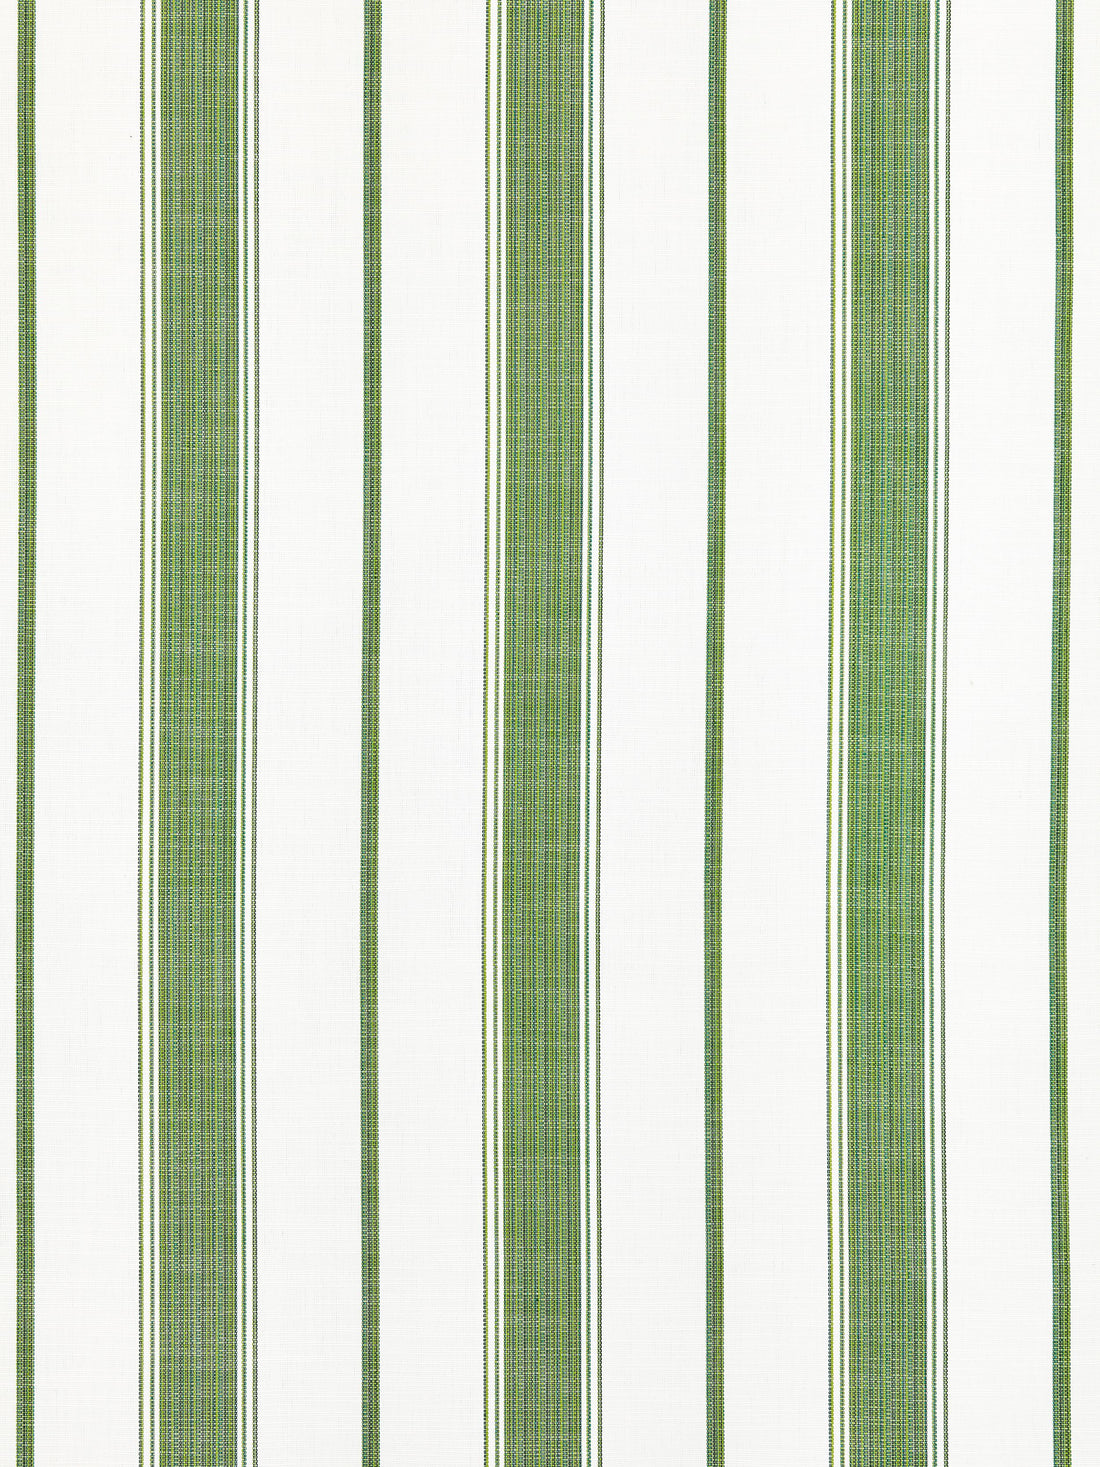 Sconset Stripe fabric in vert color - pattern number SC 000327110 - by Scalamandre in the Scalamandre Fabrics Book 1 collection